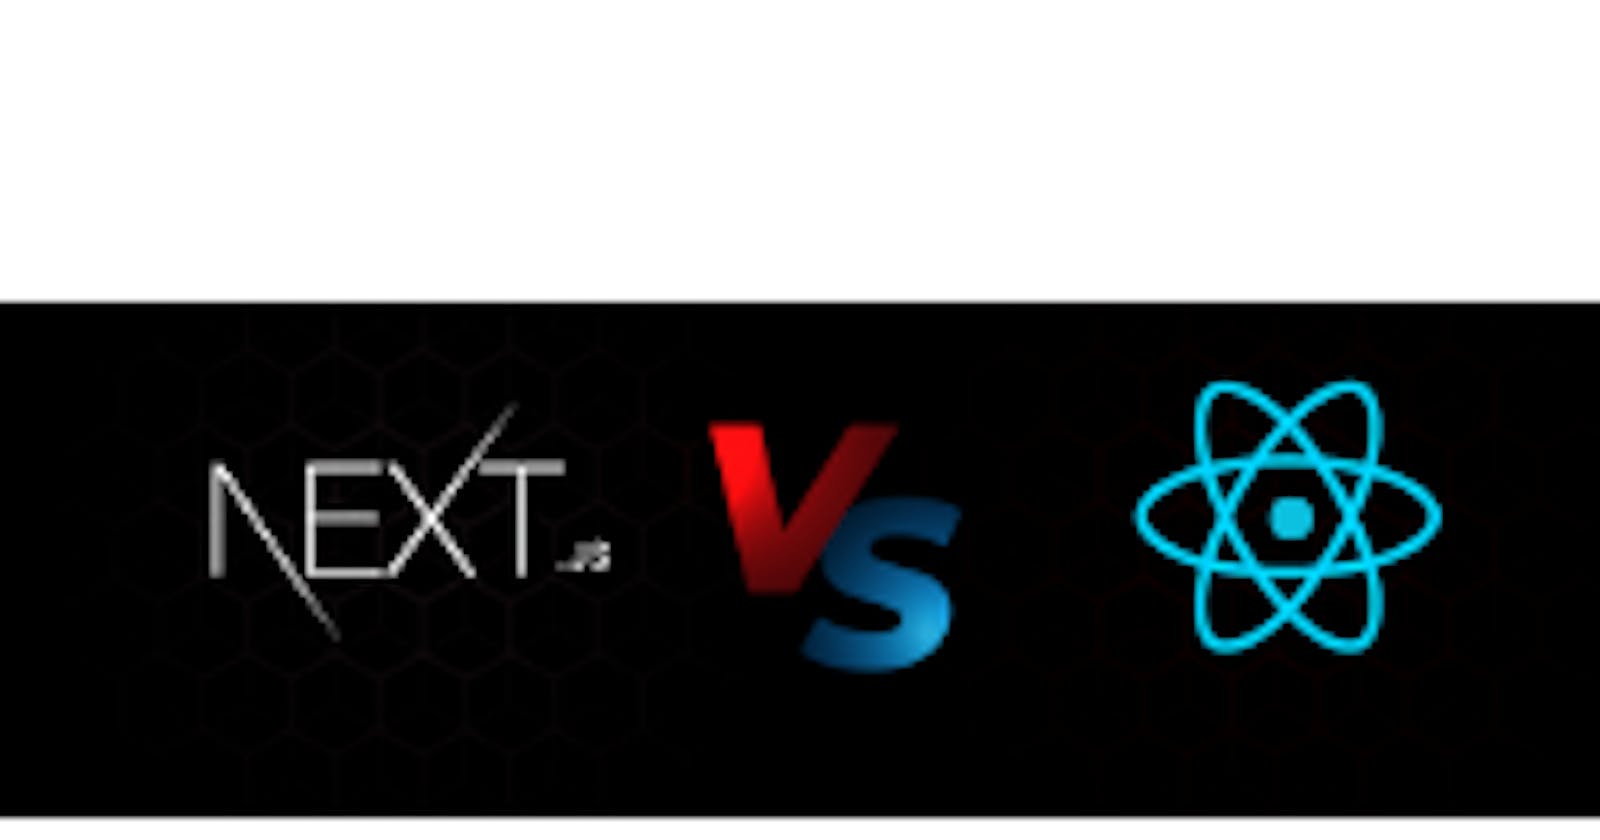 What's different between React  js and Next.js